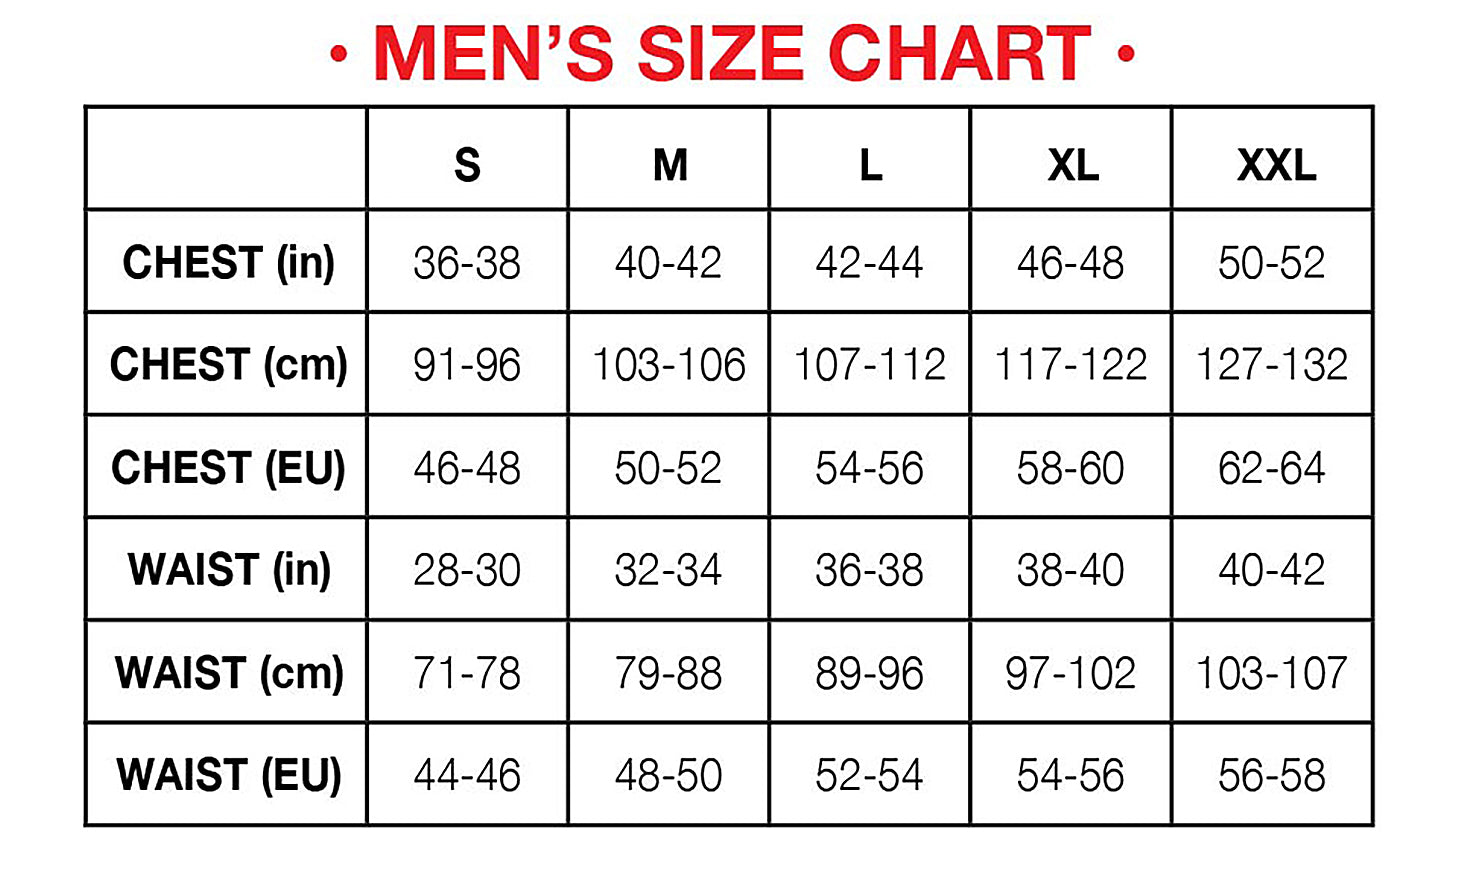 Chillys Size Chart